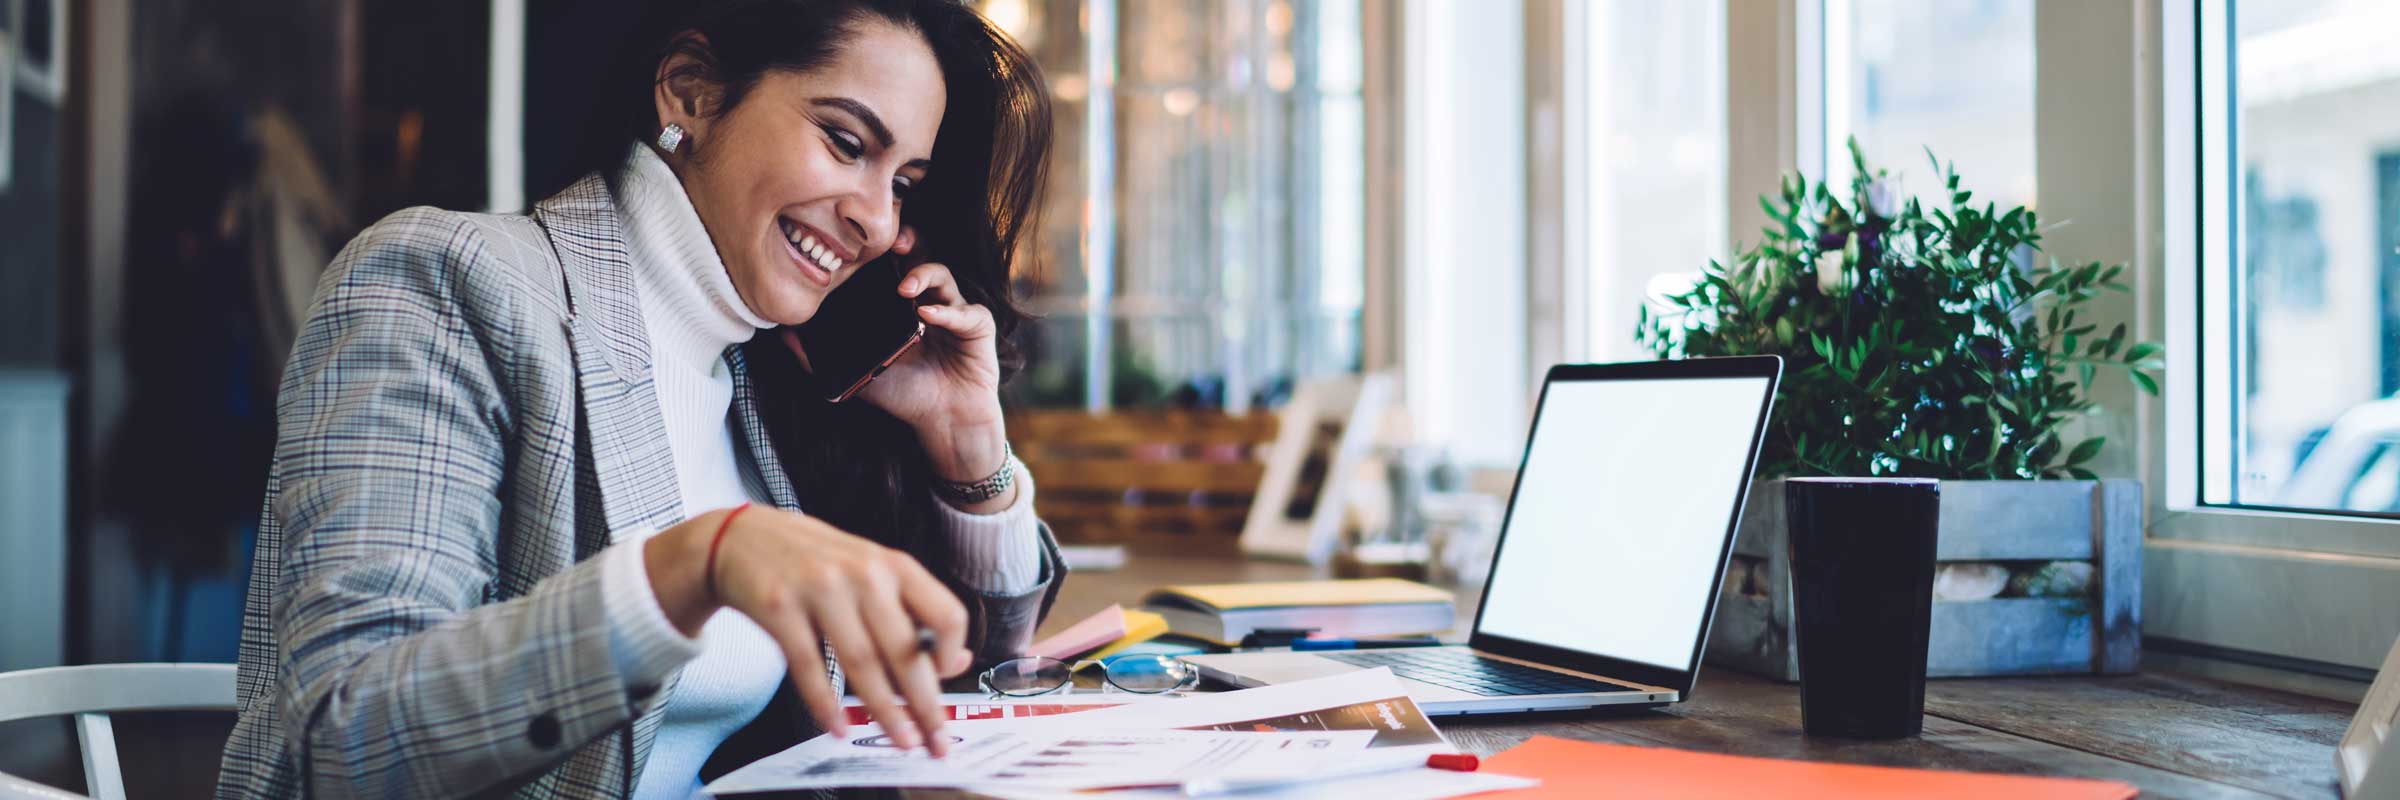 Woman smiling on the phone while working at a desk.